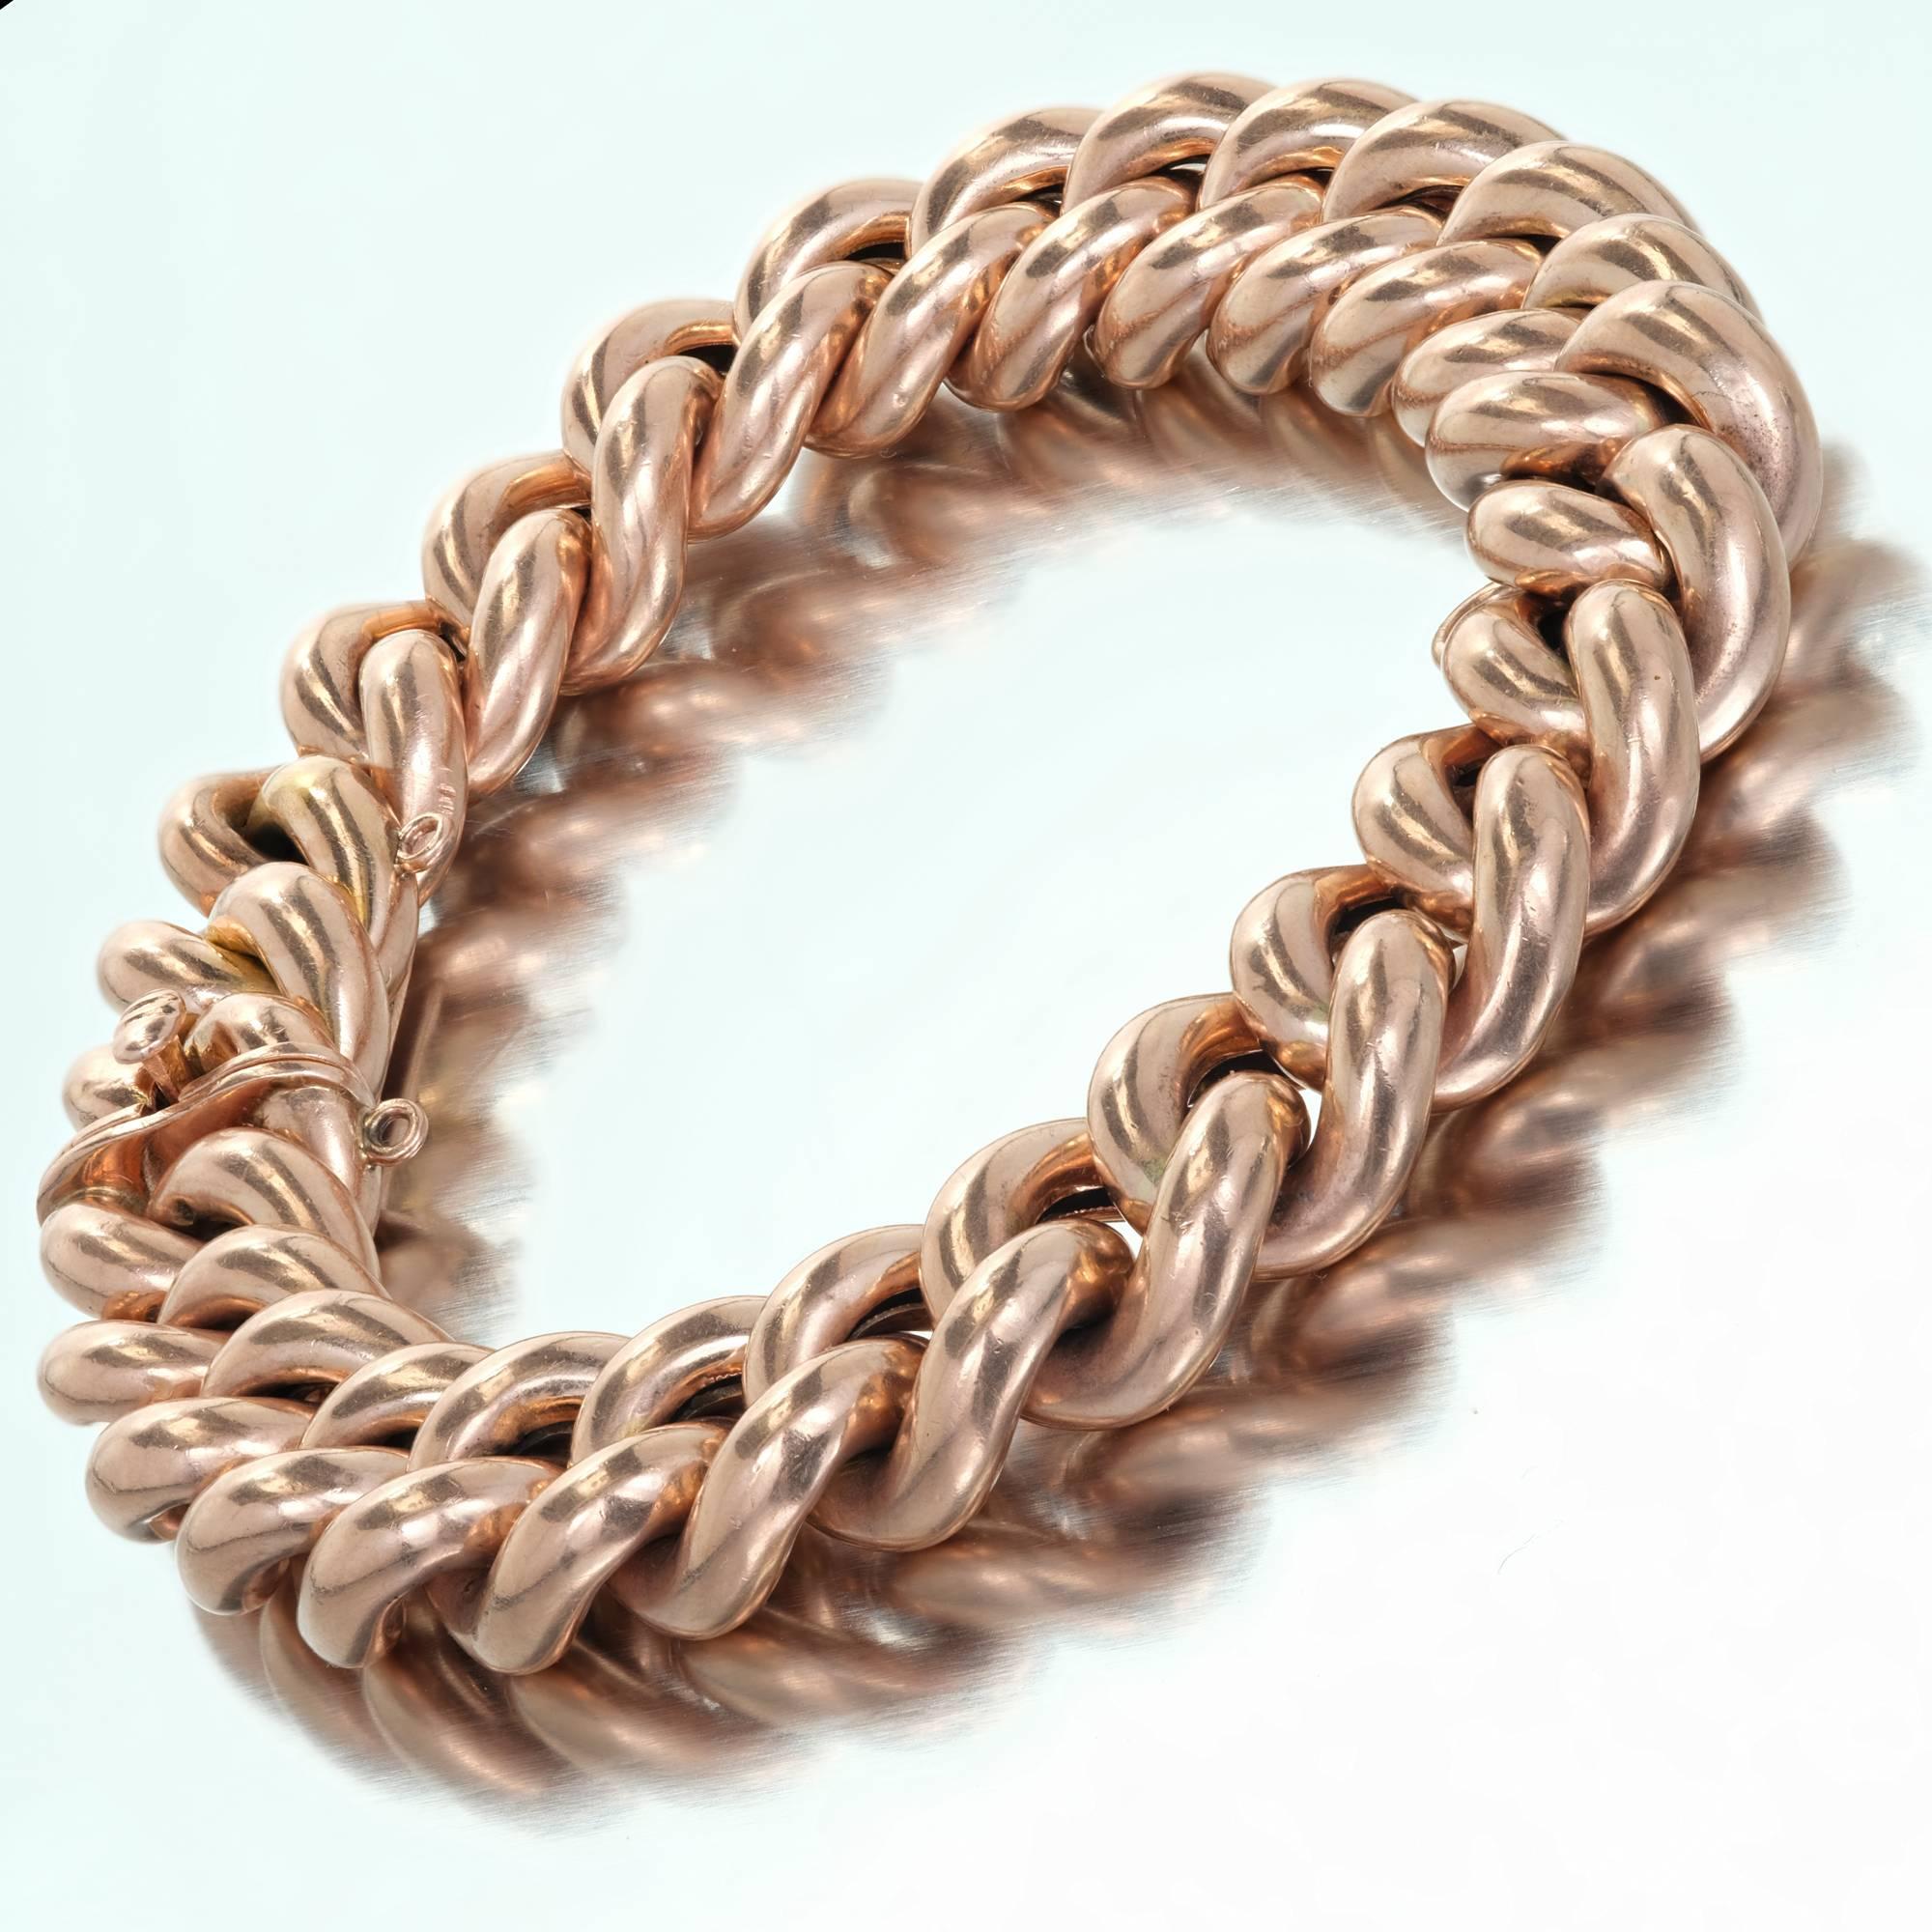 Vintage 1920-1930 puffed link 12k rose gold bracelet. European hallmarks. Natural patina and hidden built in catch. Fold down jump ring for charm to attach if wanted.

12k rose gold
Tested and stamped: 12k
Hallmark: European Hallmarks
Width: